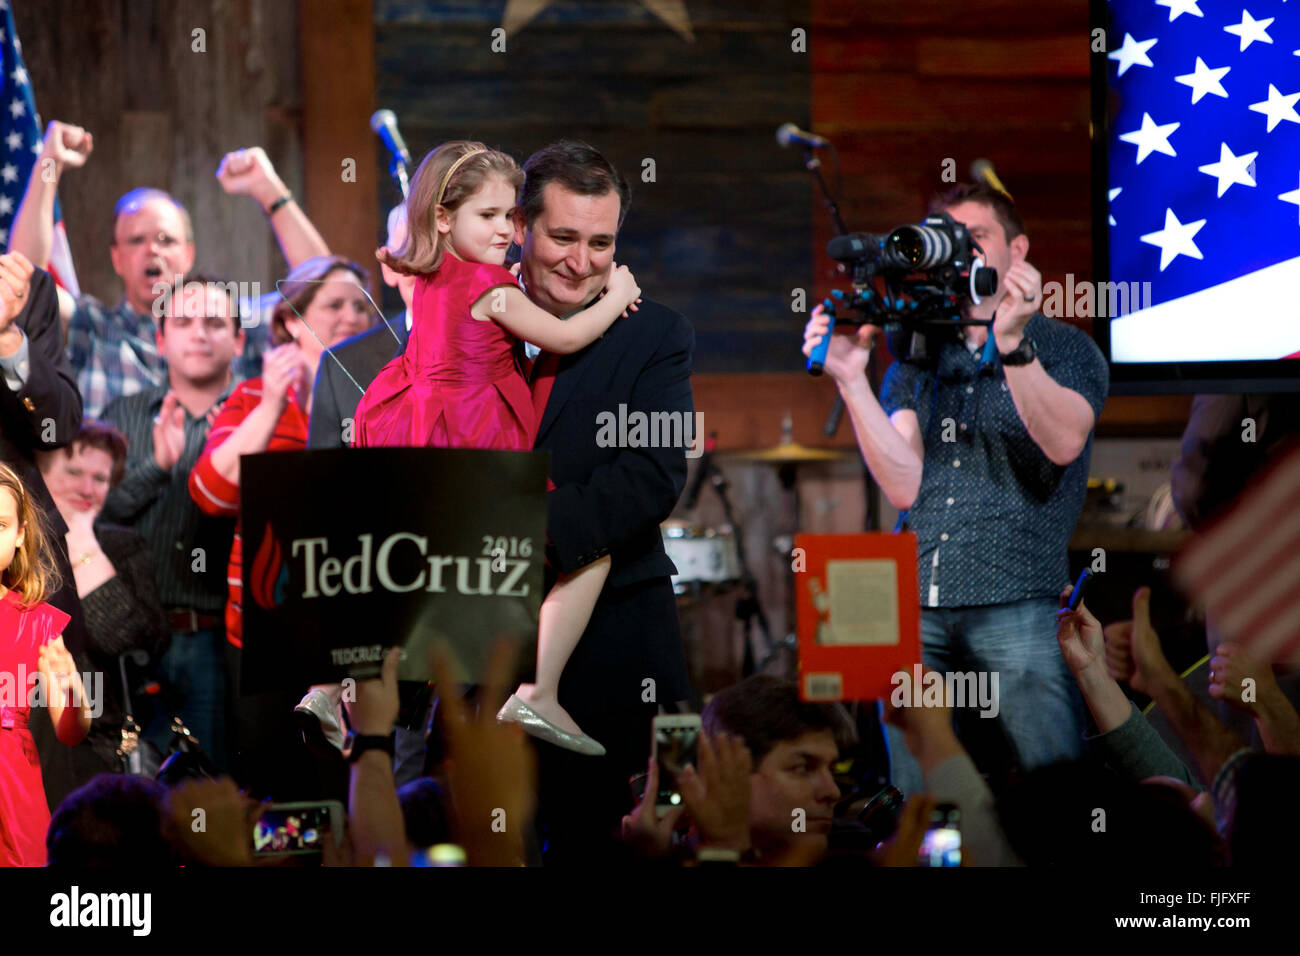 Republican presidential hopeful Ted Cruz holds daughter while savoring victory in the Texas primary election with supporters Stock Photo